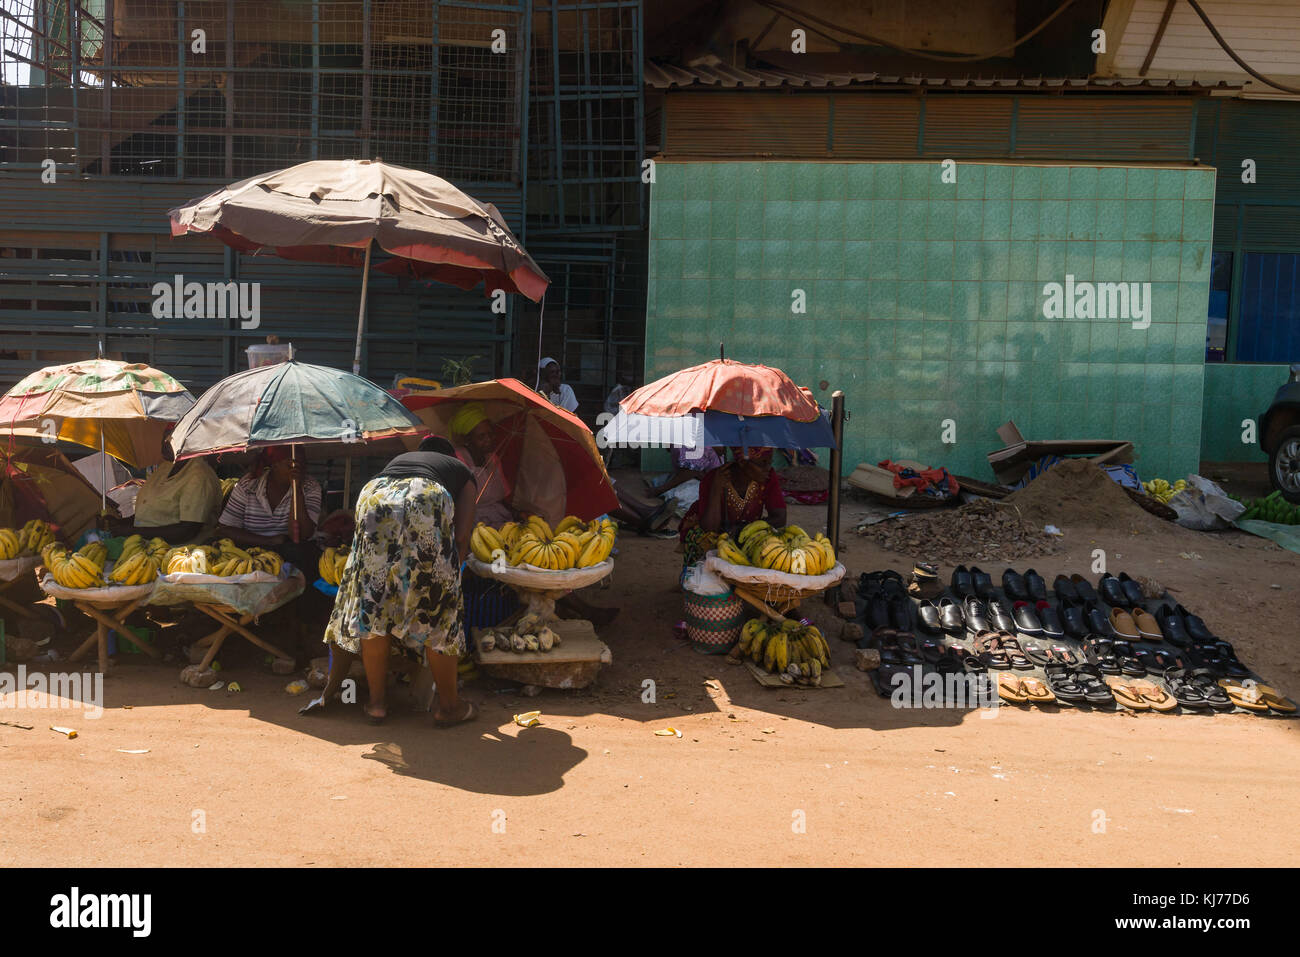 .Several small fruit and vegetable stalls with people sat in the shade of parasols by the side of the road, Uganda, Africa Stock Photo